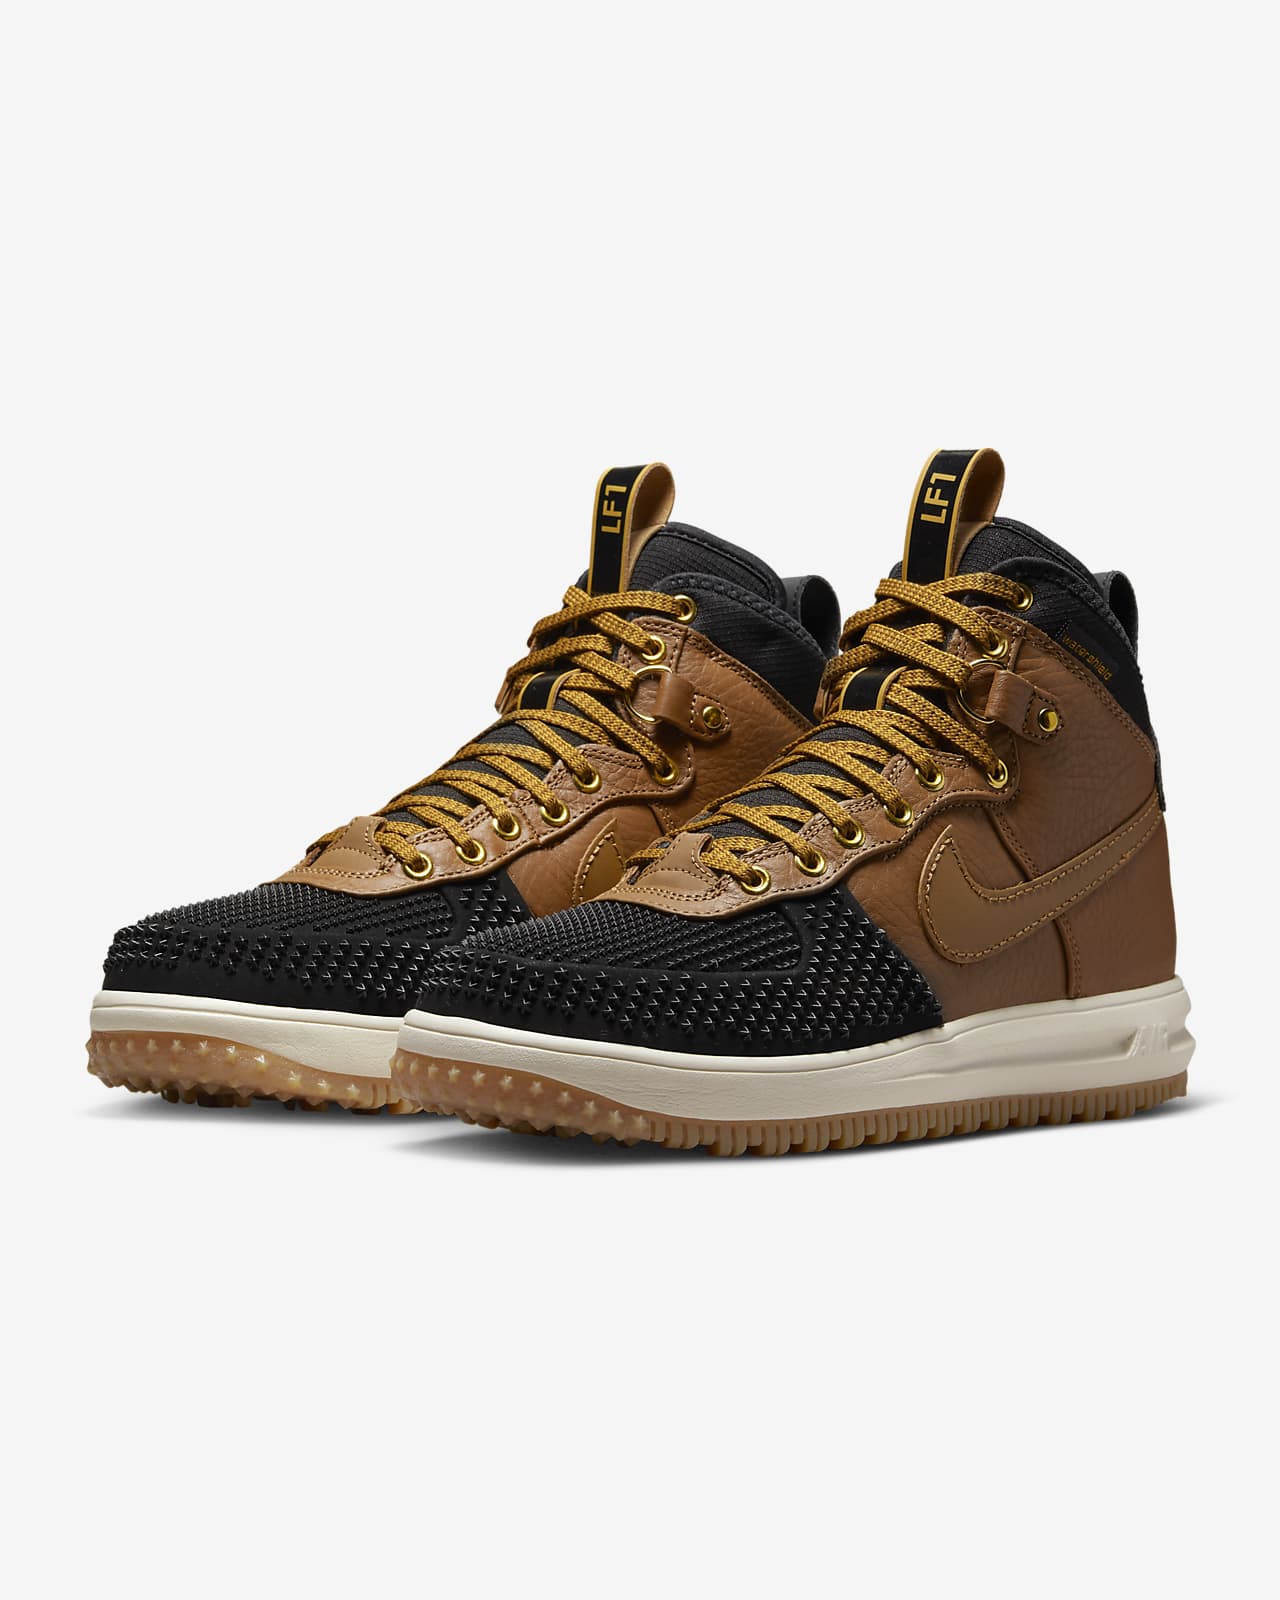 Duckboot para hombre Nike Force 1.